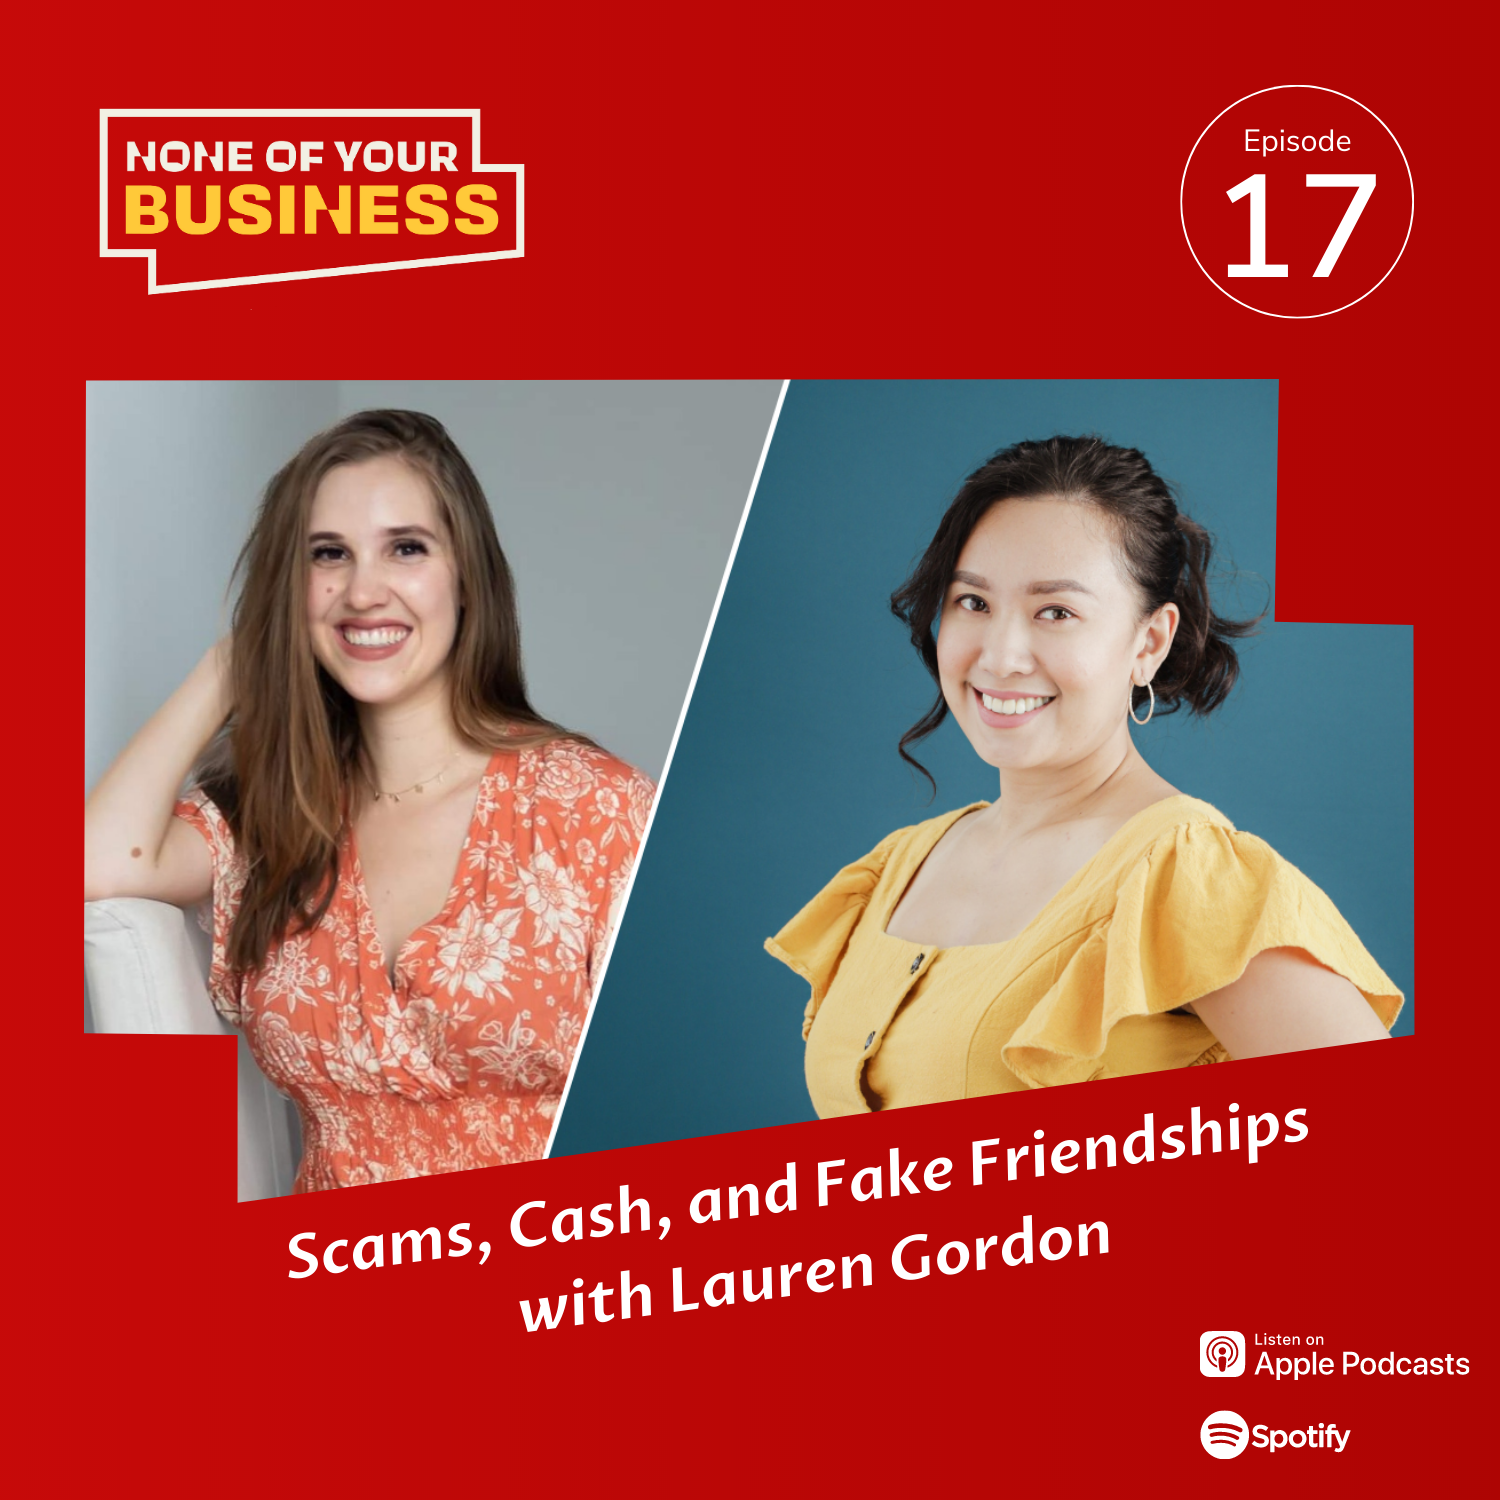 Scams, Cash, and Fake Friendships with Lauren Gordon